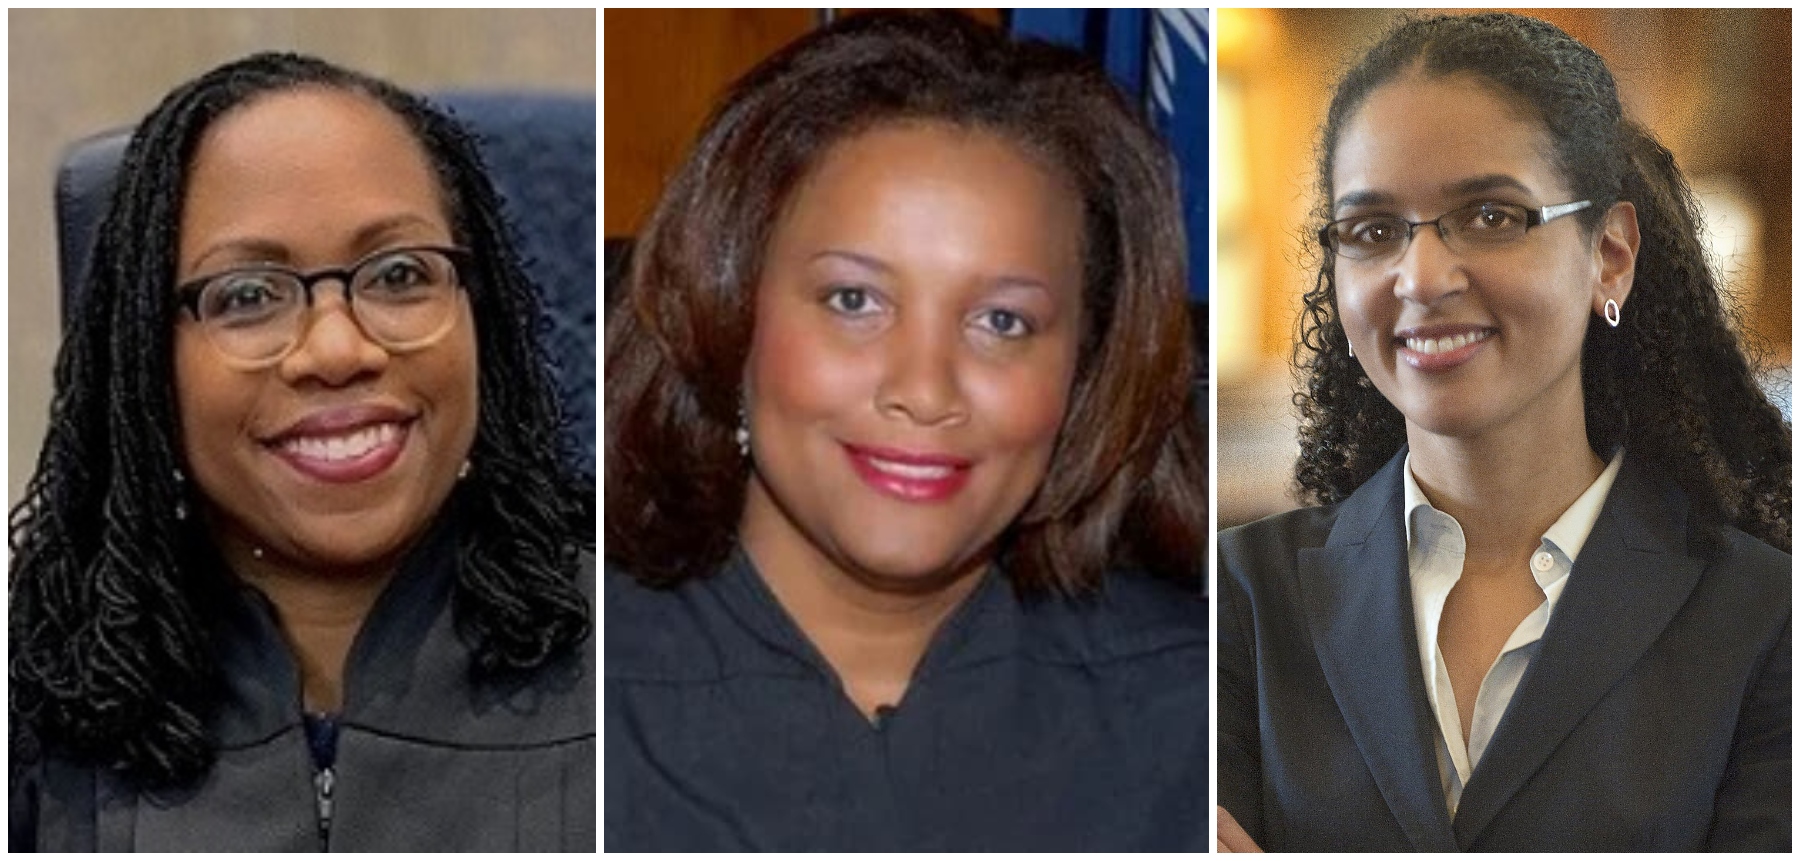 Calls grow for first Black woman Supreme Court justice as Breyer